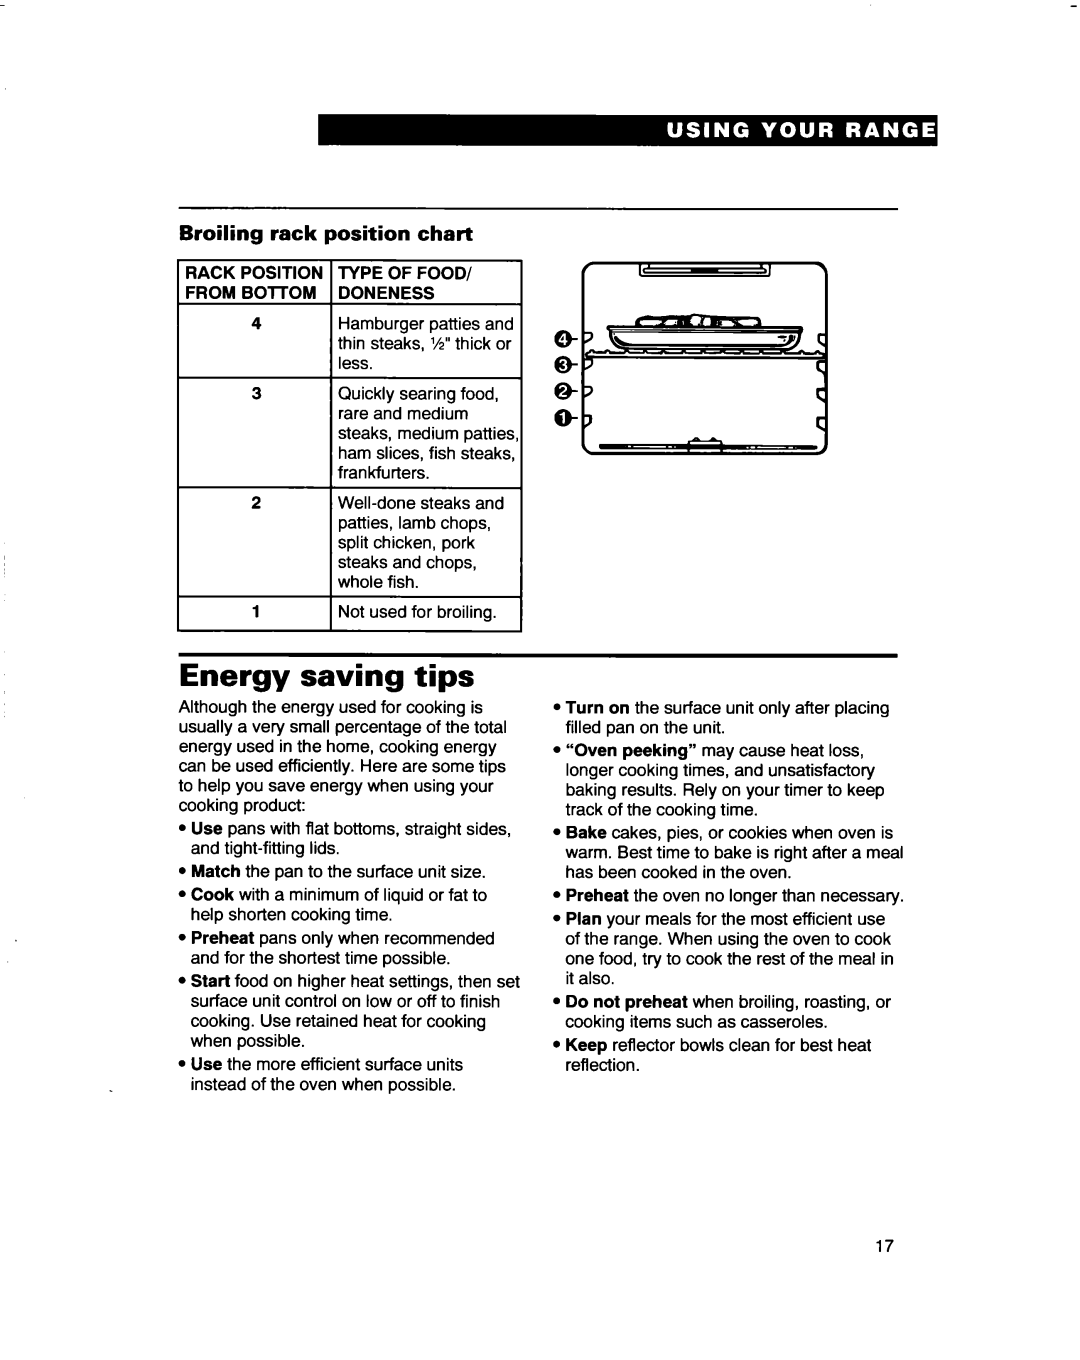 Whirlpool RF4700XB important safety instructions Energy saving tips, Broiling rack position chart 